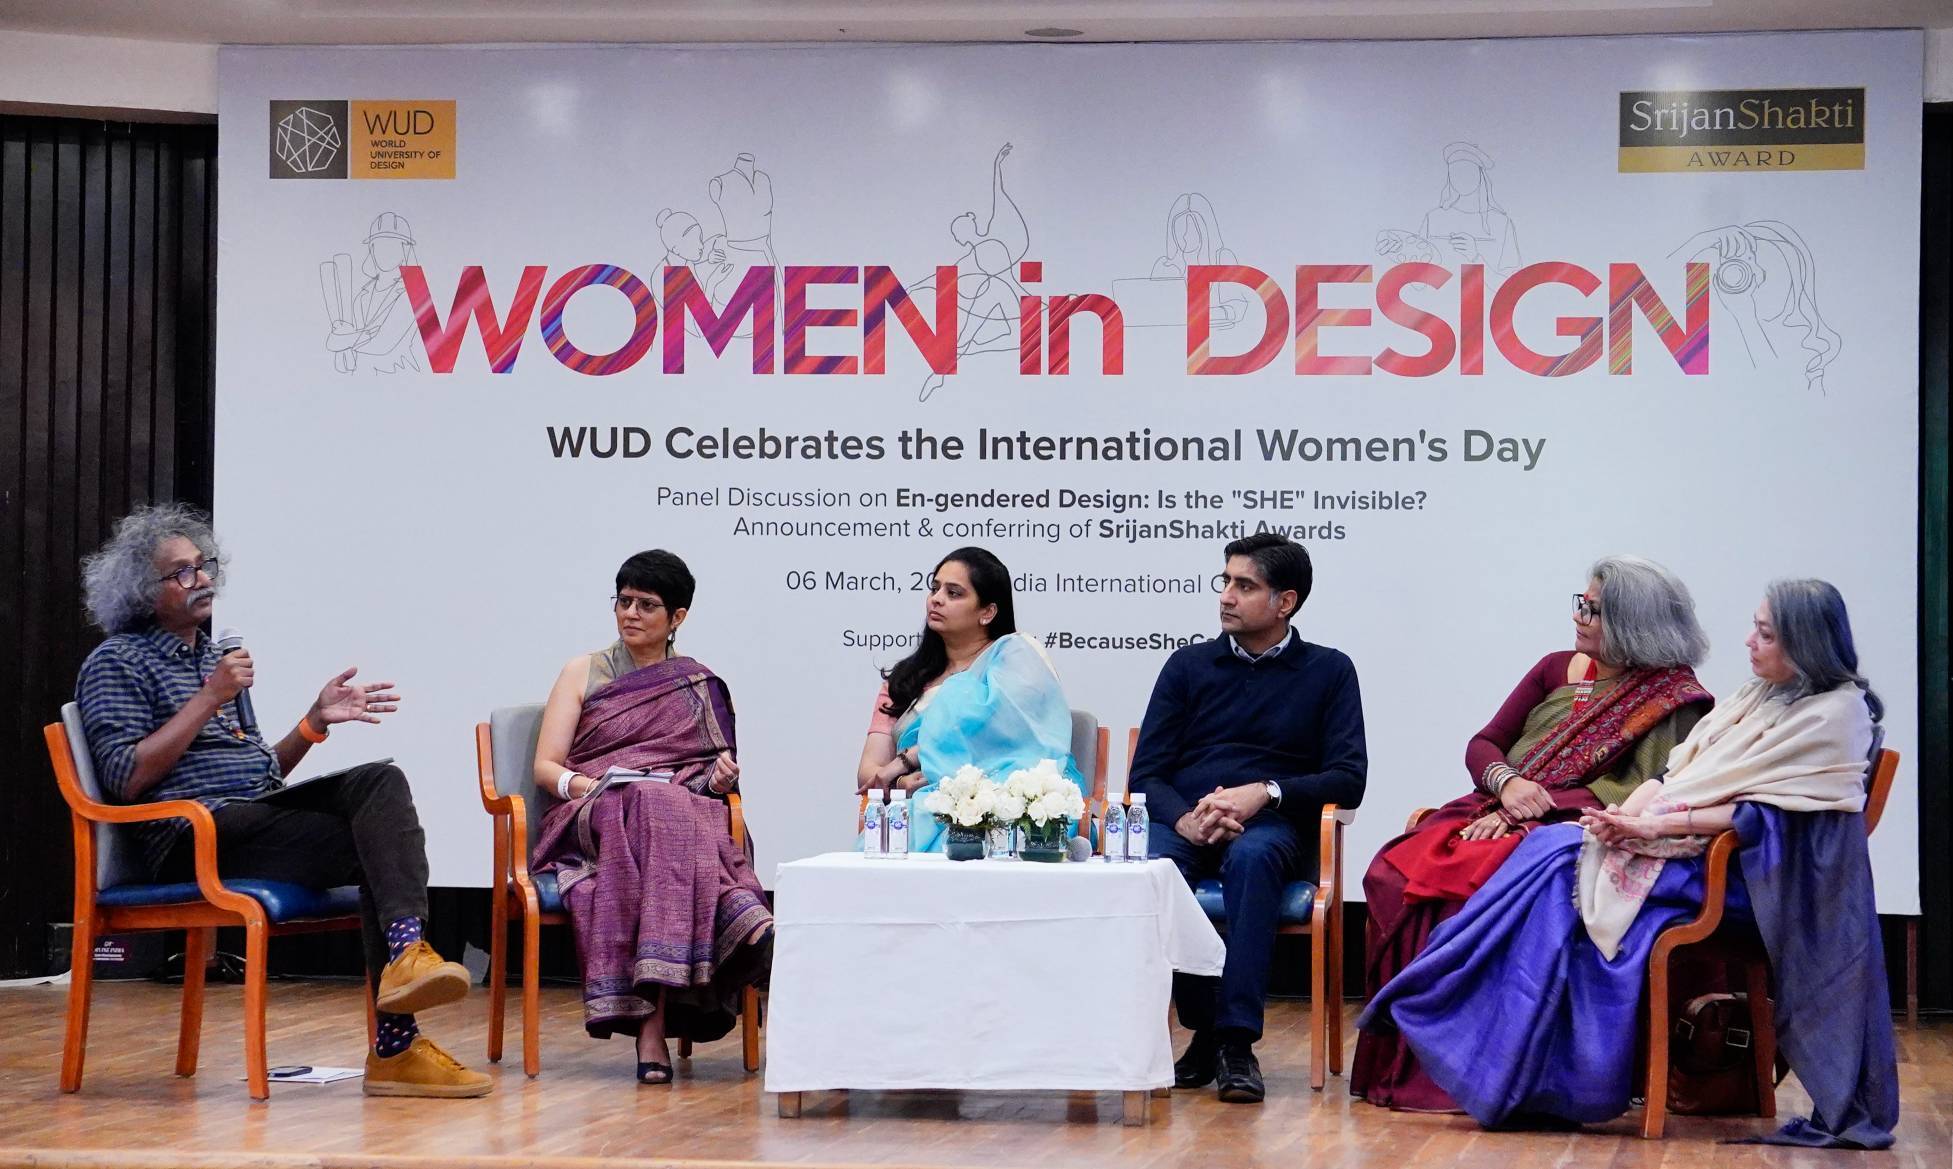 WUD hosts a panel discussion on women in design